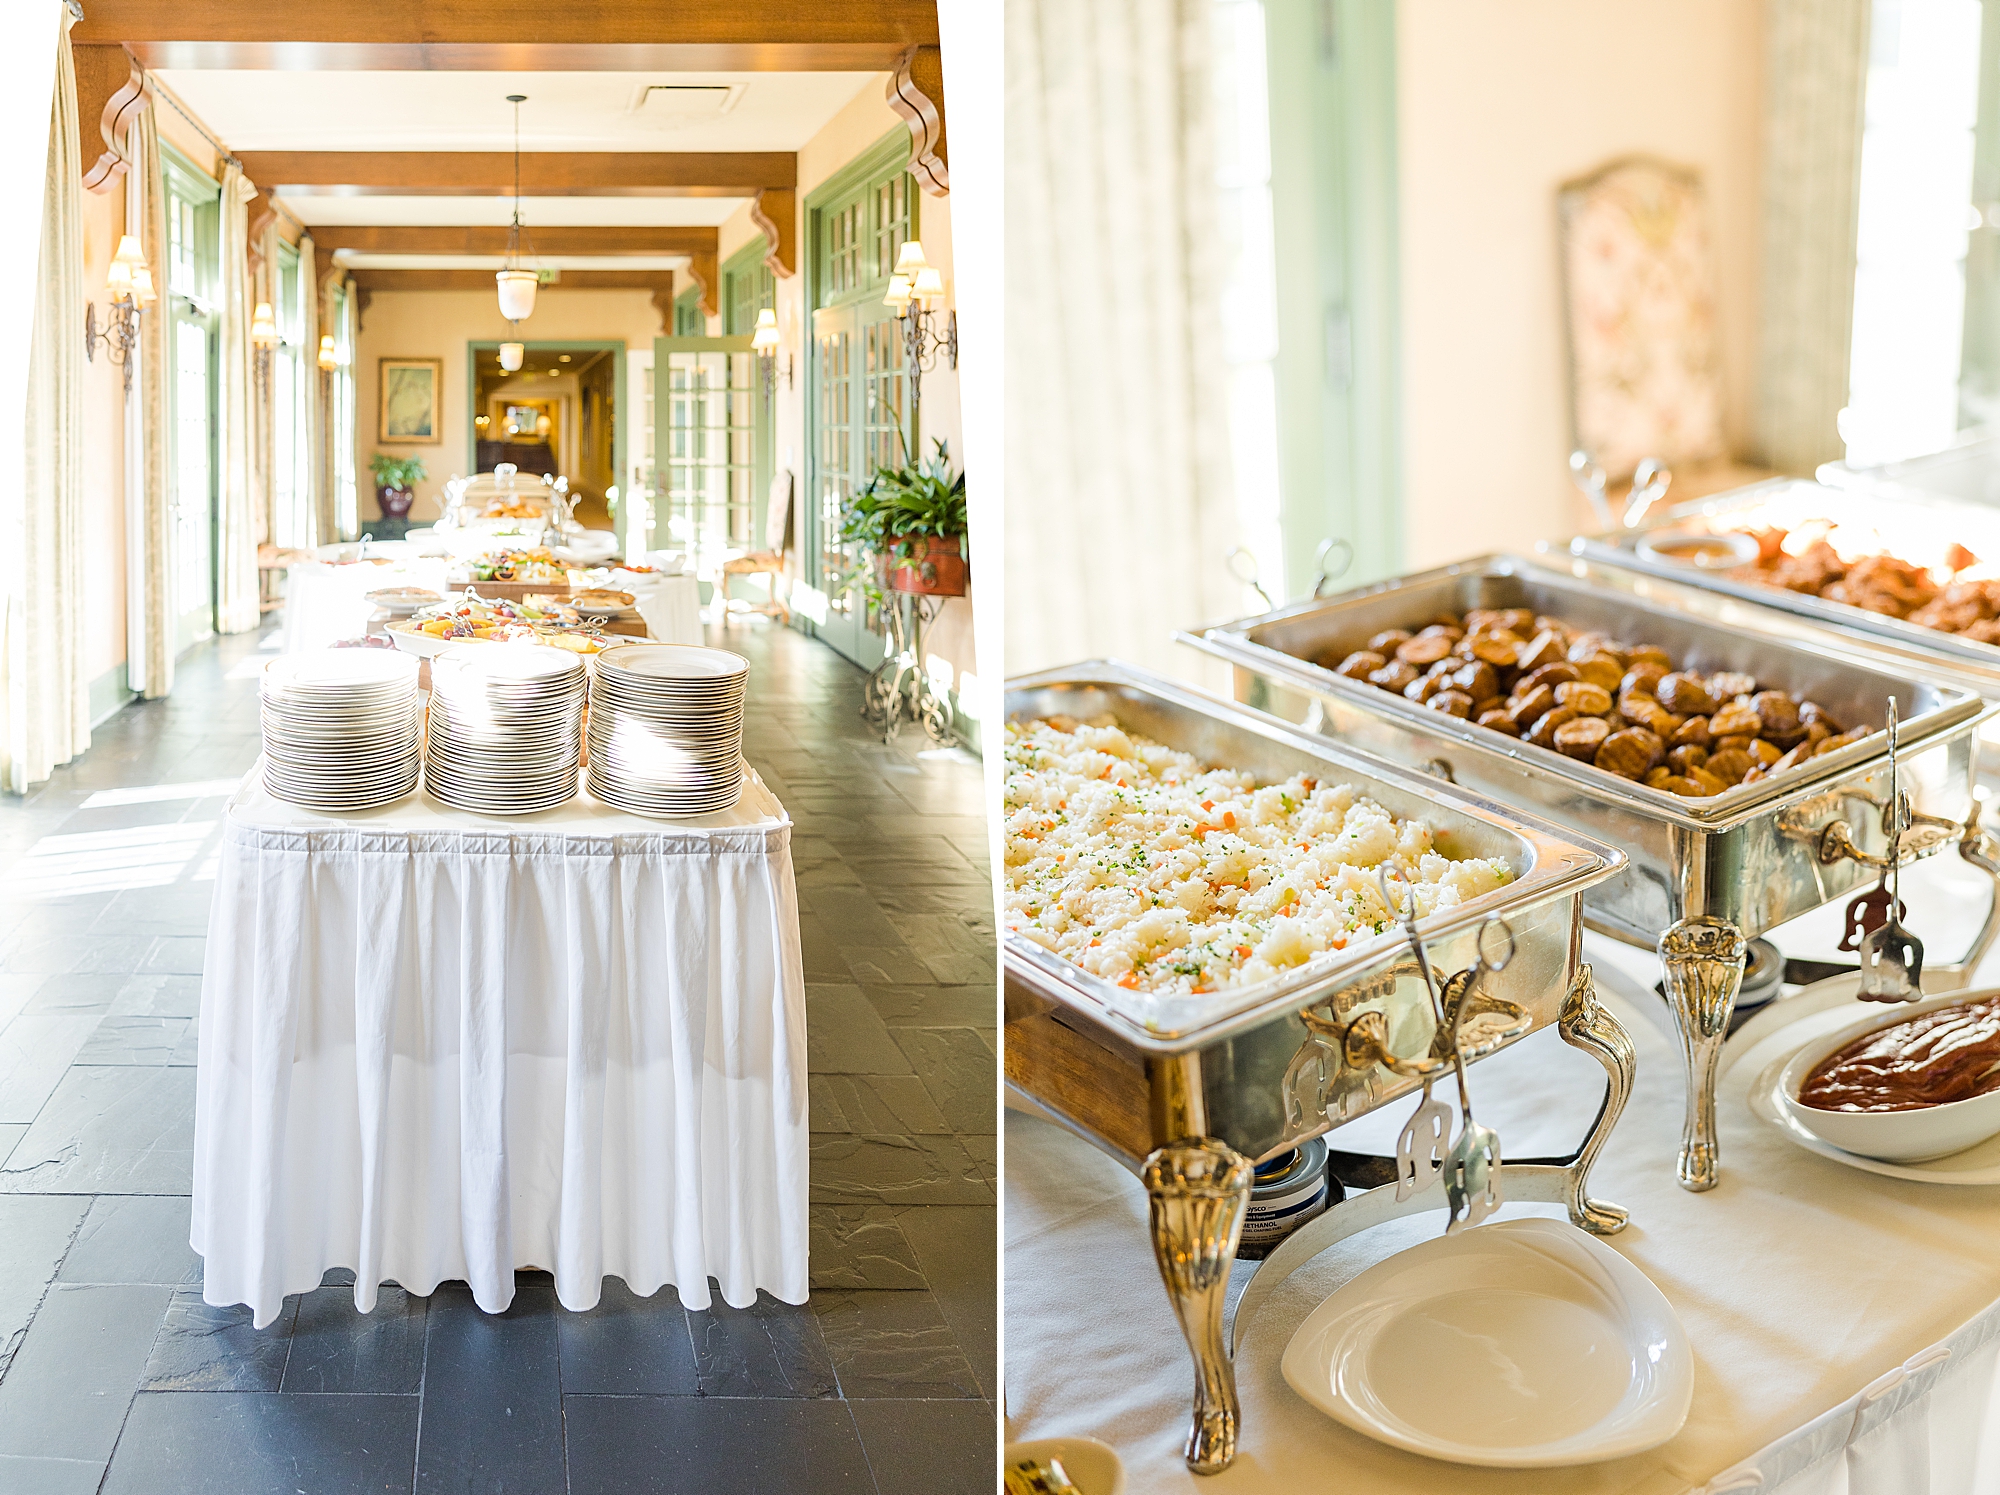 A line up of the catered meal for the bride and groom and their guests